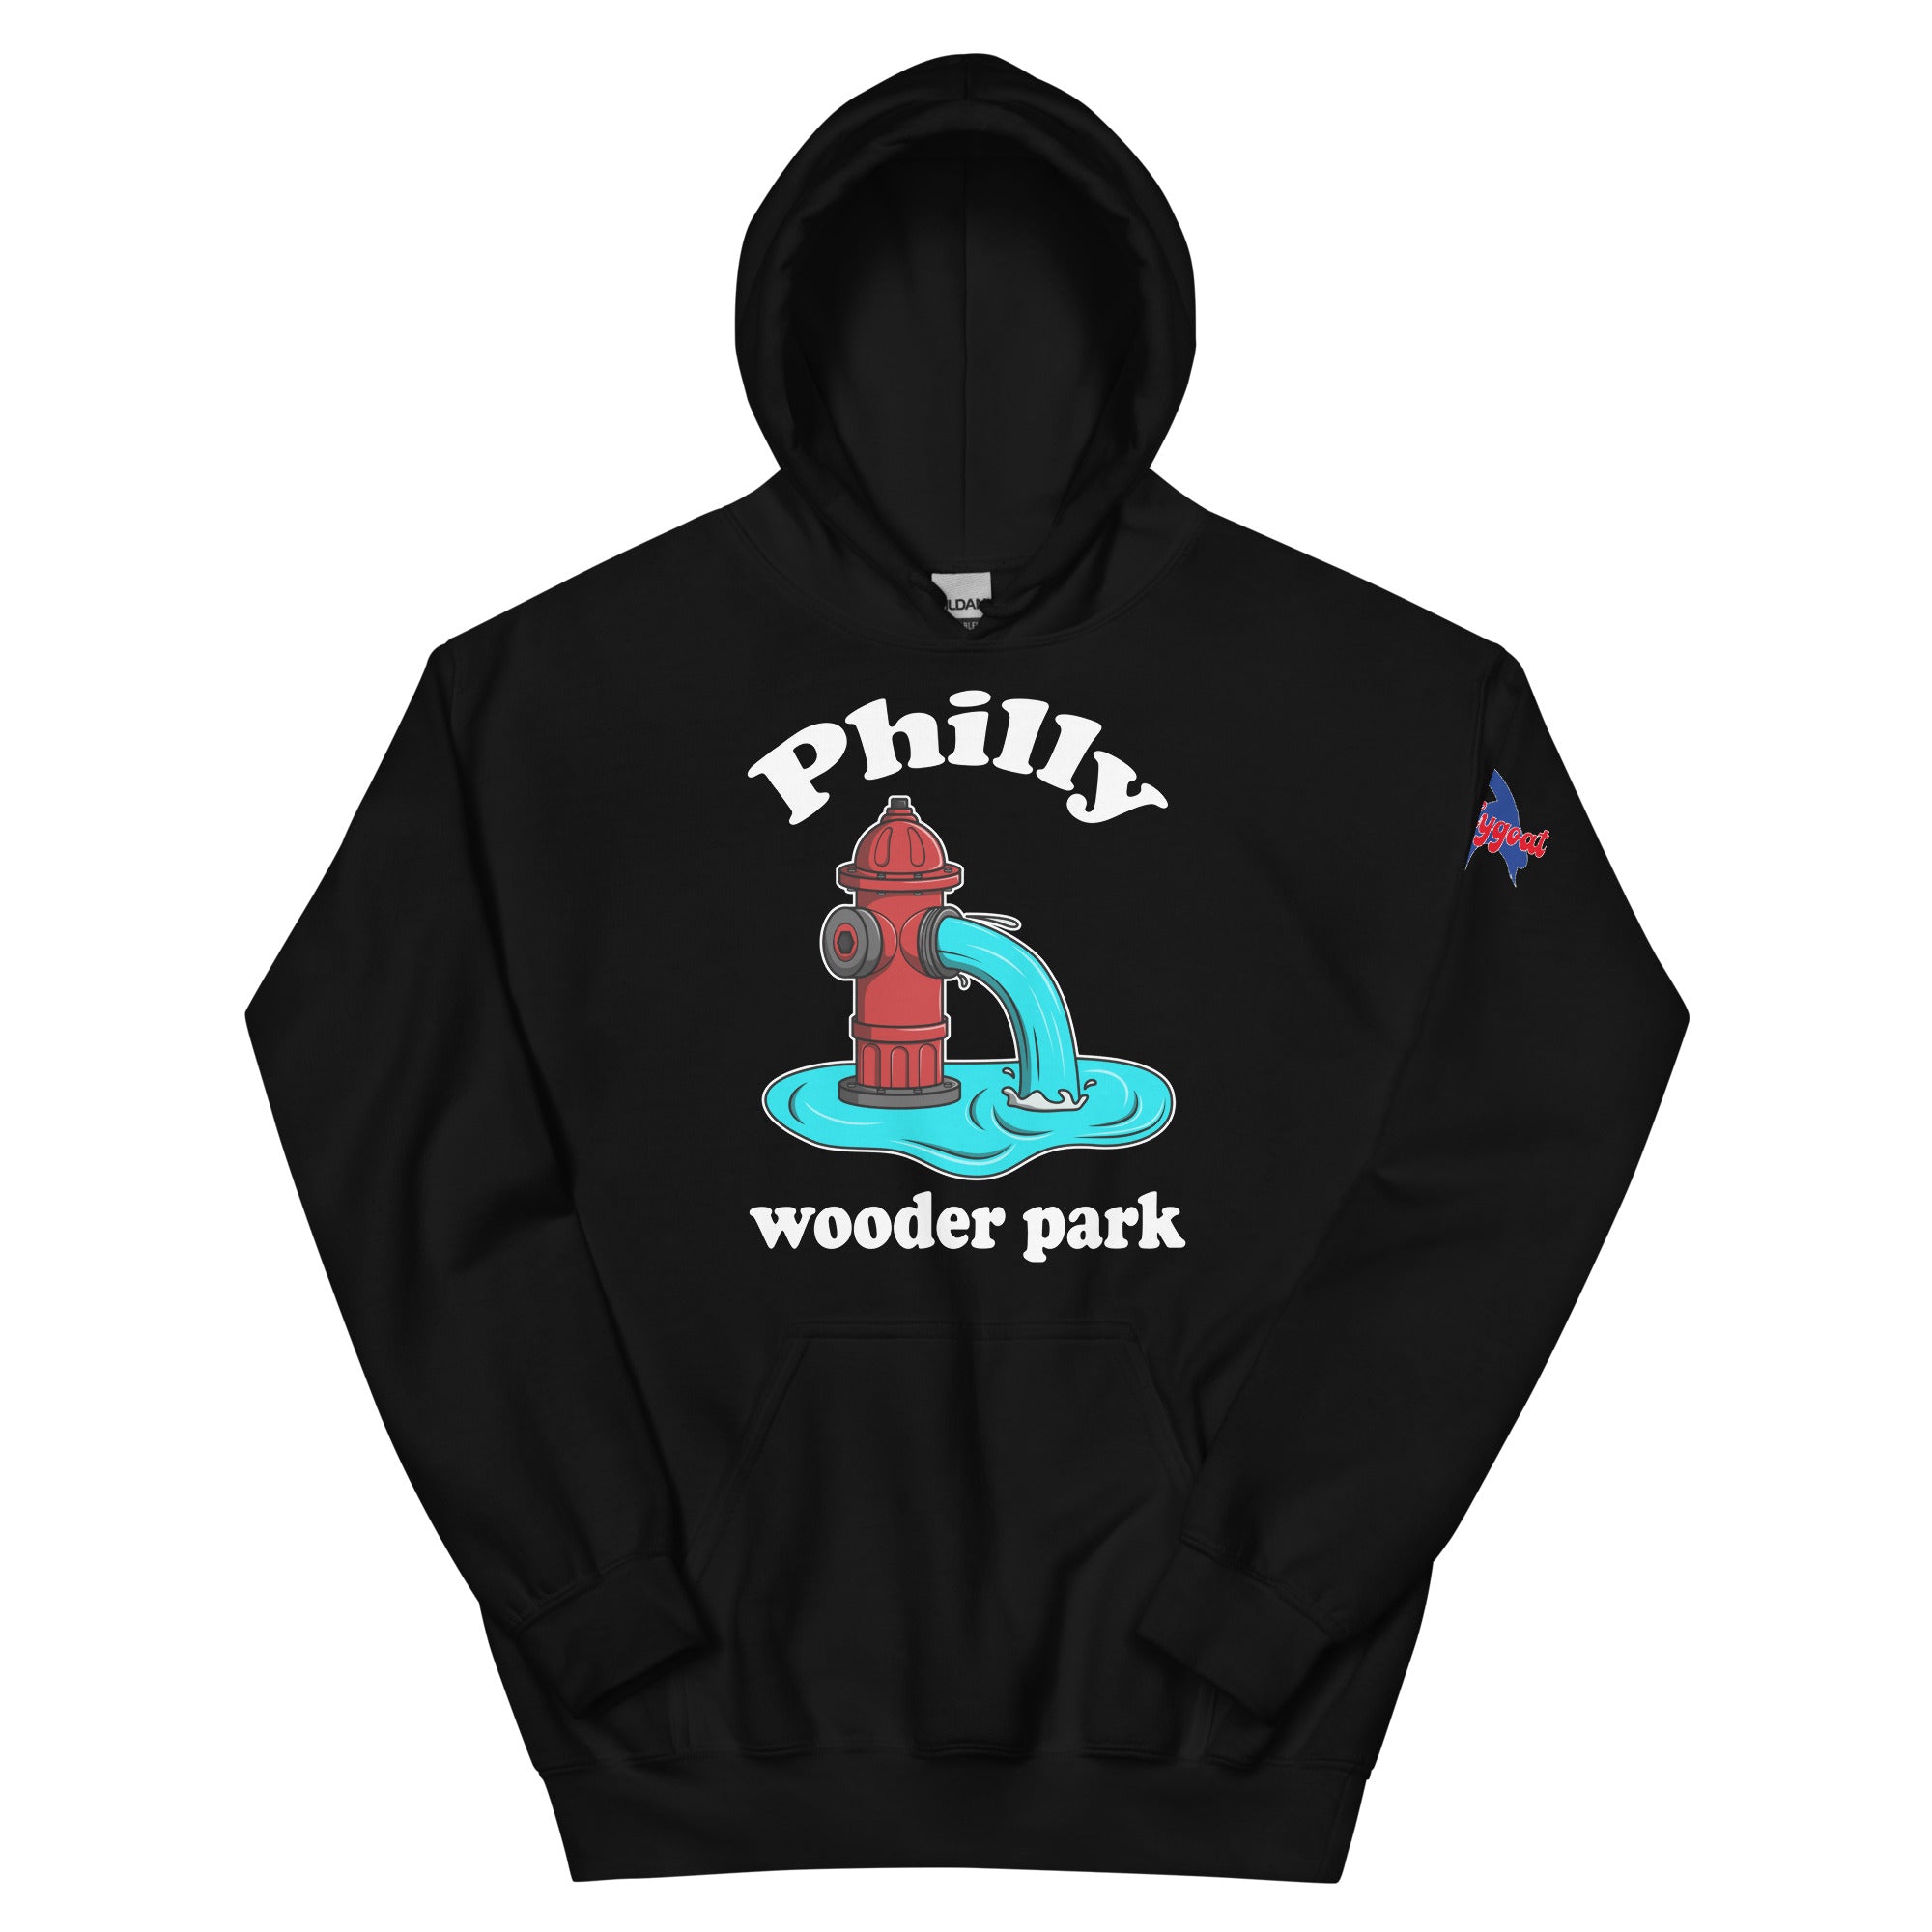 Philadelphia Philly wooder park water park fire hydrant funny black hoodie from Phillygoat